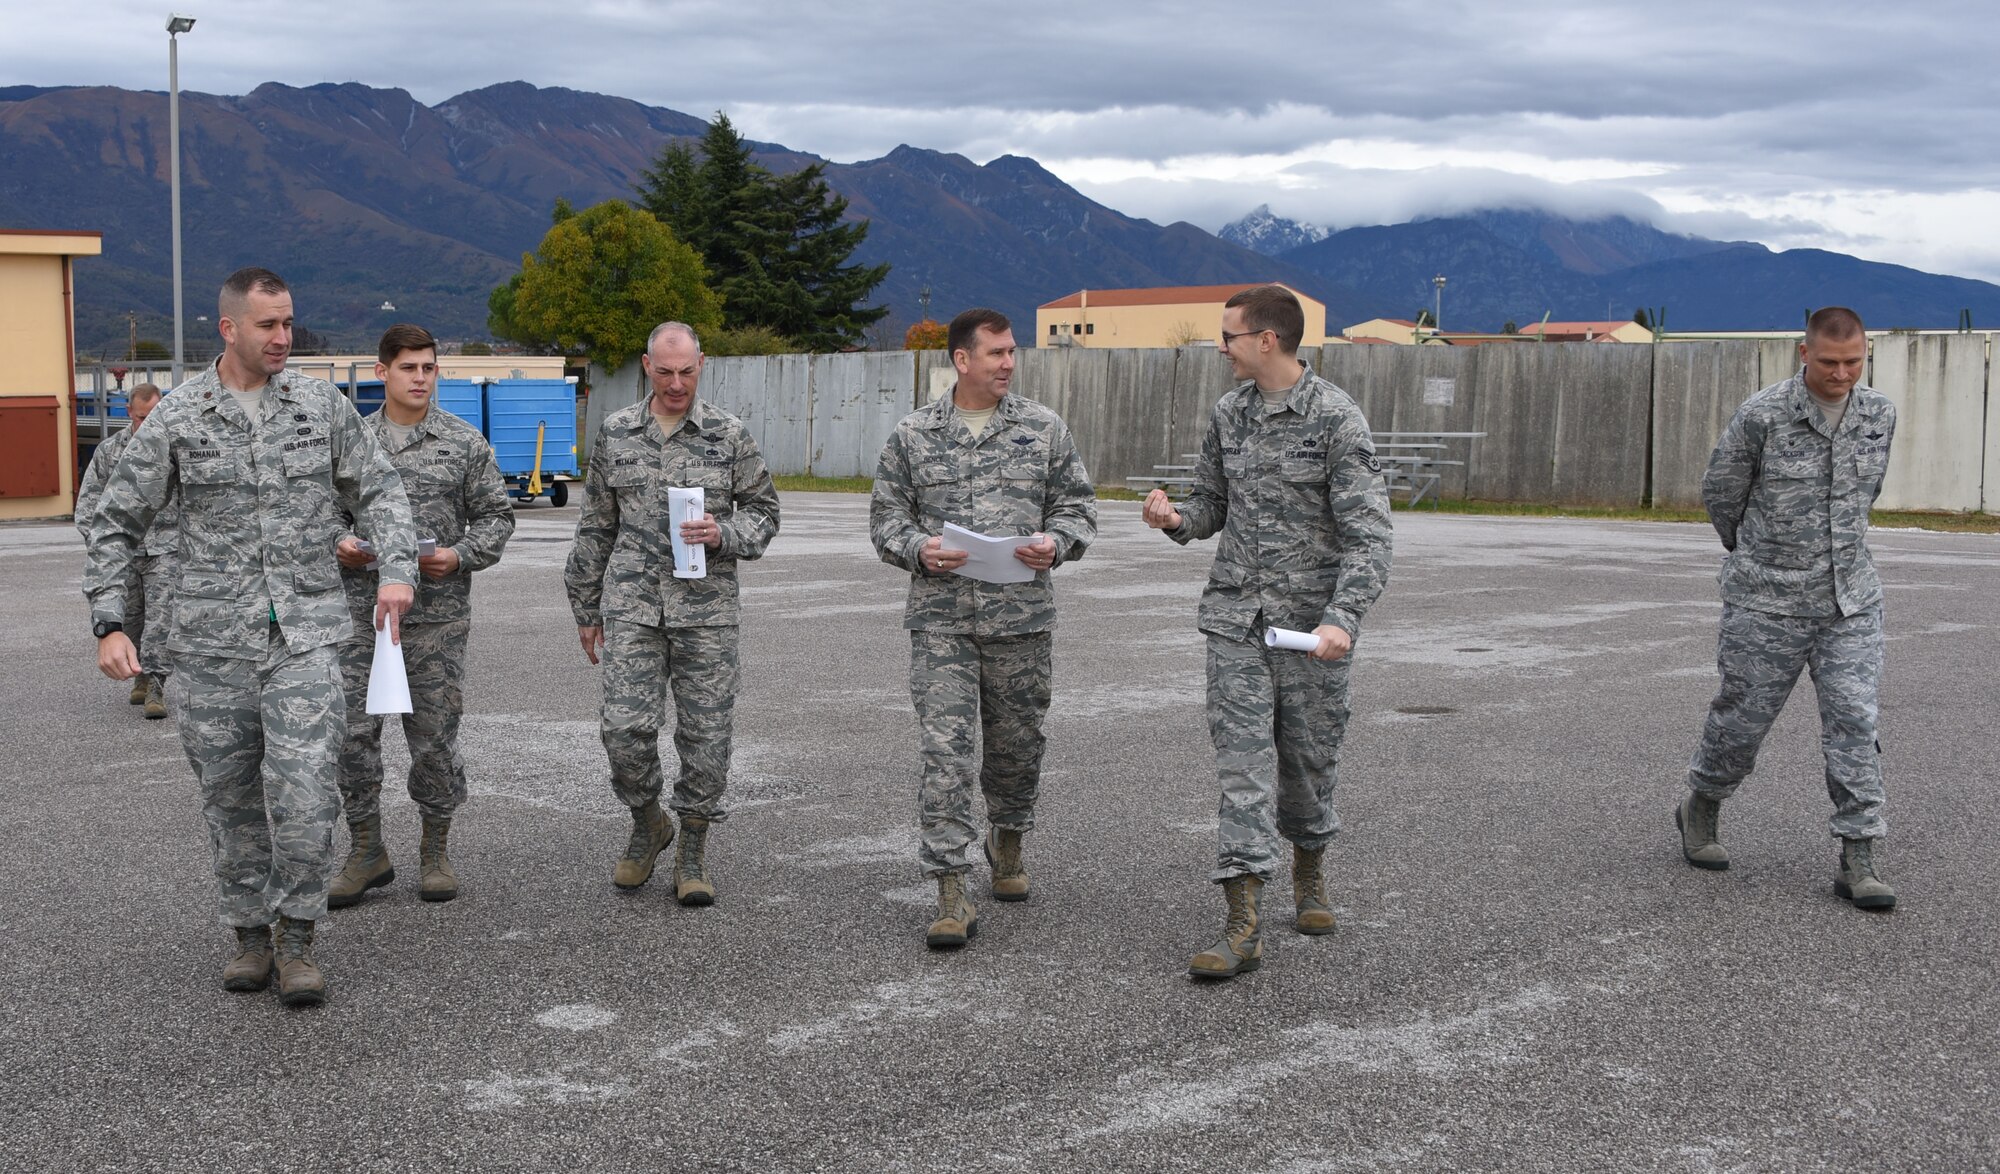 Staff Sgt. Nicholas Cochran (center right), with the 724th Air Mobility Squadron, briefs Maj. gen. Christopher Bence (center), commander, USAF Expeditionary Center and Command Chief Master Sgt. Larry Williams, USAF EC command chief, on the facility upgrade plans for the 724th AMS at Aviano Air Base, Italy, Nov. 6, 2017. Bence and Williams along with the 521st Air Mobility Operations Wing leadership team visited six squadrons of the 521st AMOW at Ramstein AB and Spangdahlem AB, Germany, Aviano AB, Italy and RAF Mildenhall, U.K. (U.S. Air Force photo by Tech. Sgt. Jamie Powell)